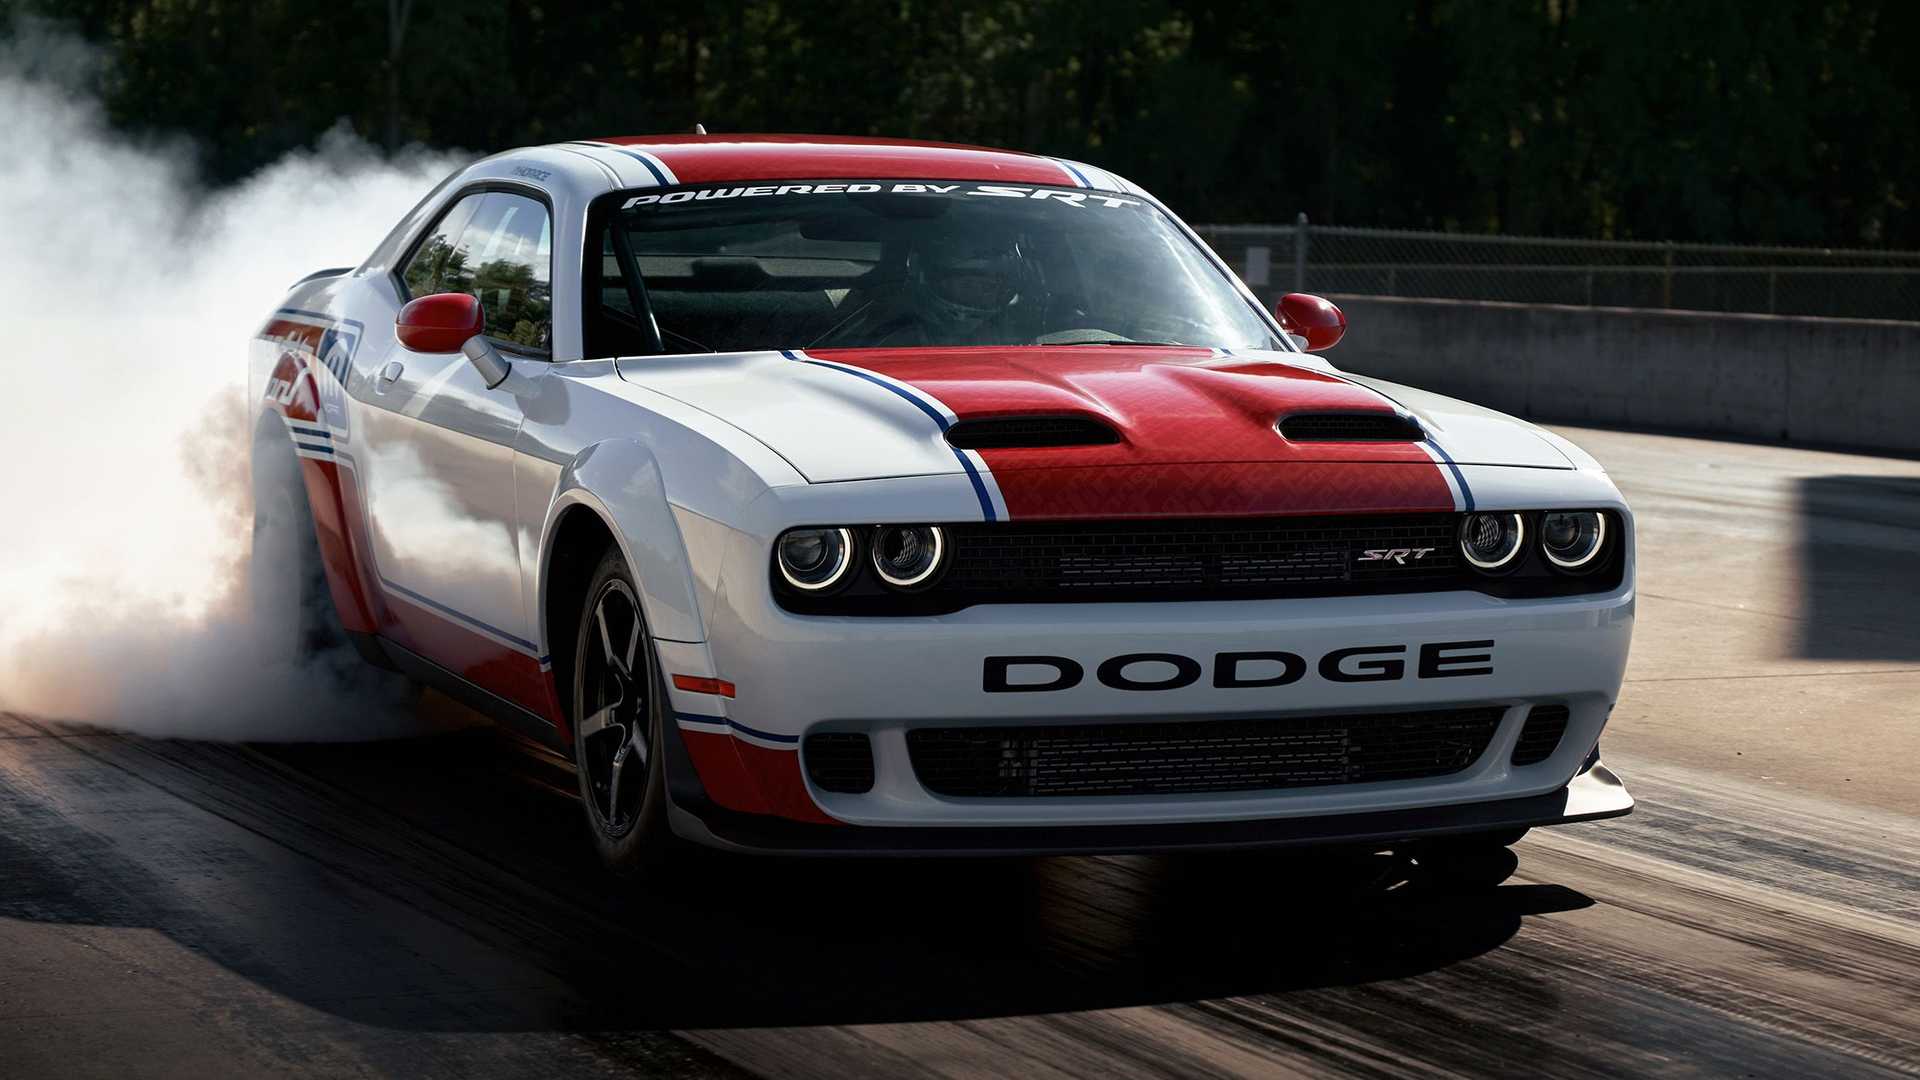 Dodge Direct Connection